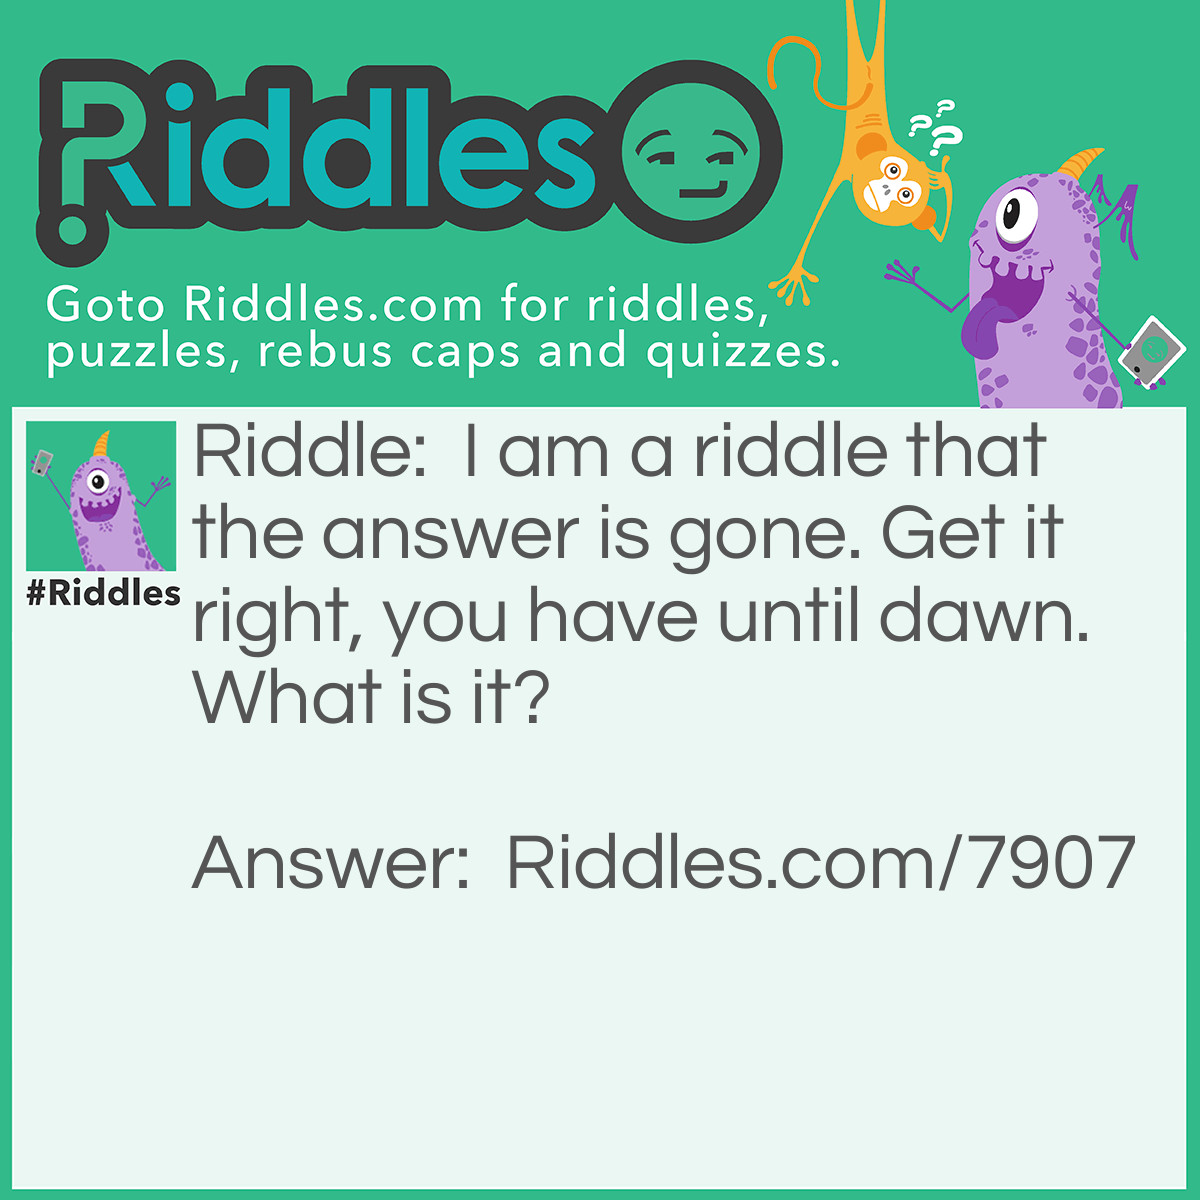 Riddle: I am a <a href="https://www.riddles.com">riddle</a> that the answer is gone. Get it right, you have until dawn. What is it? Answer: Gone.